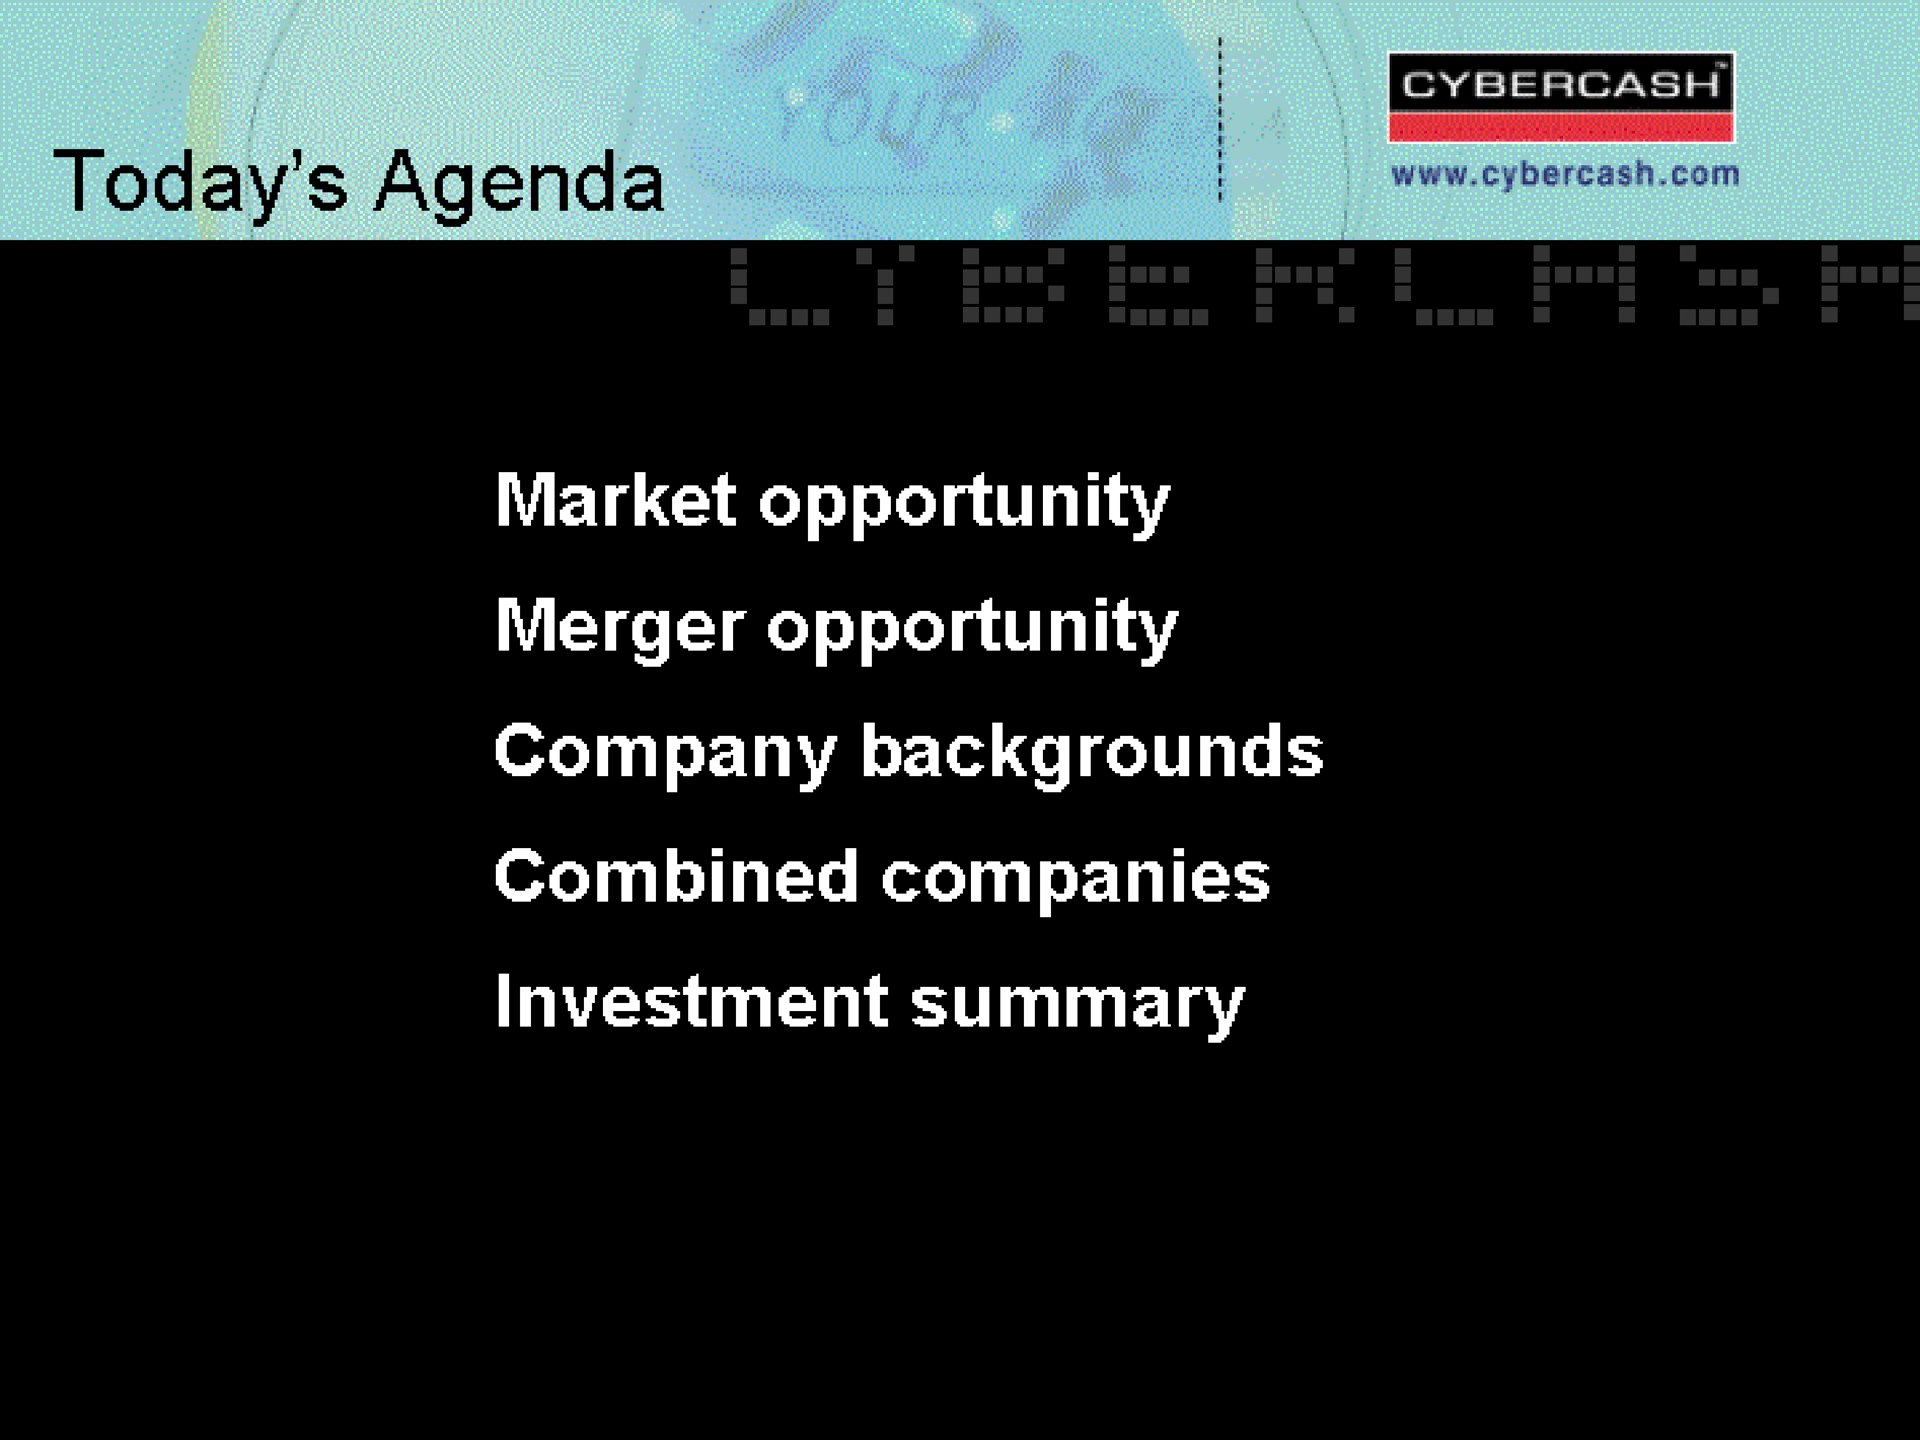 todays agenda market opportunity merger opportunity company backgrounds combined companies investment summary | CyberCash